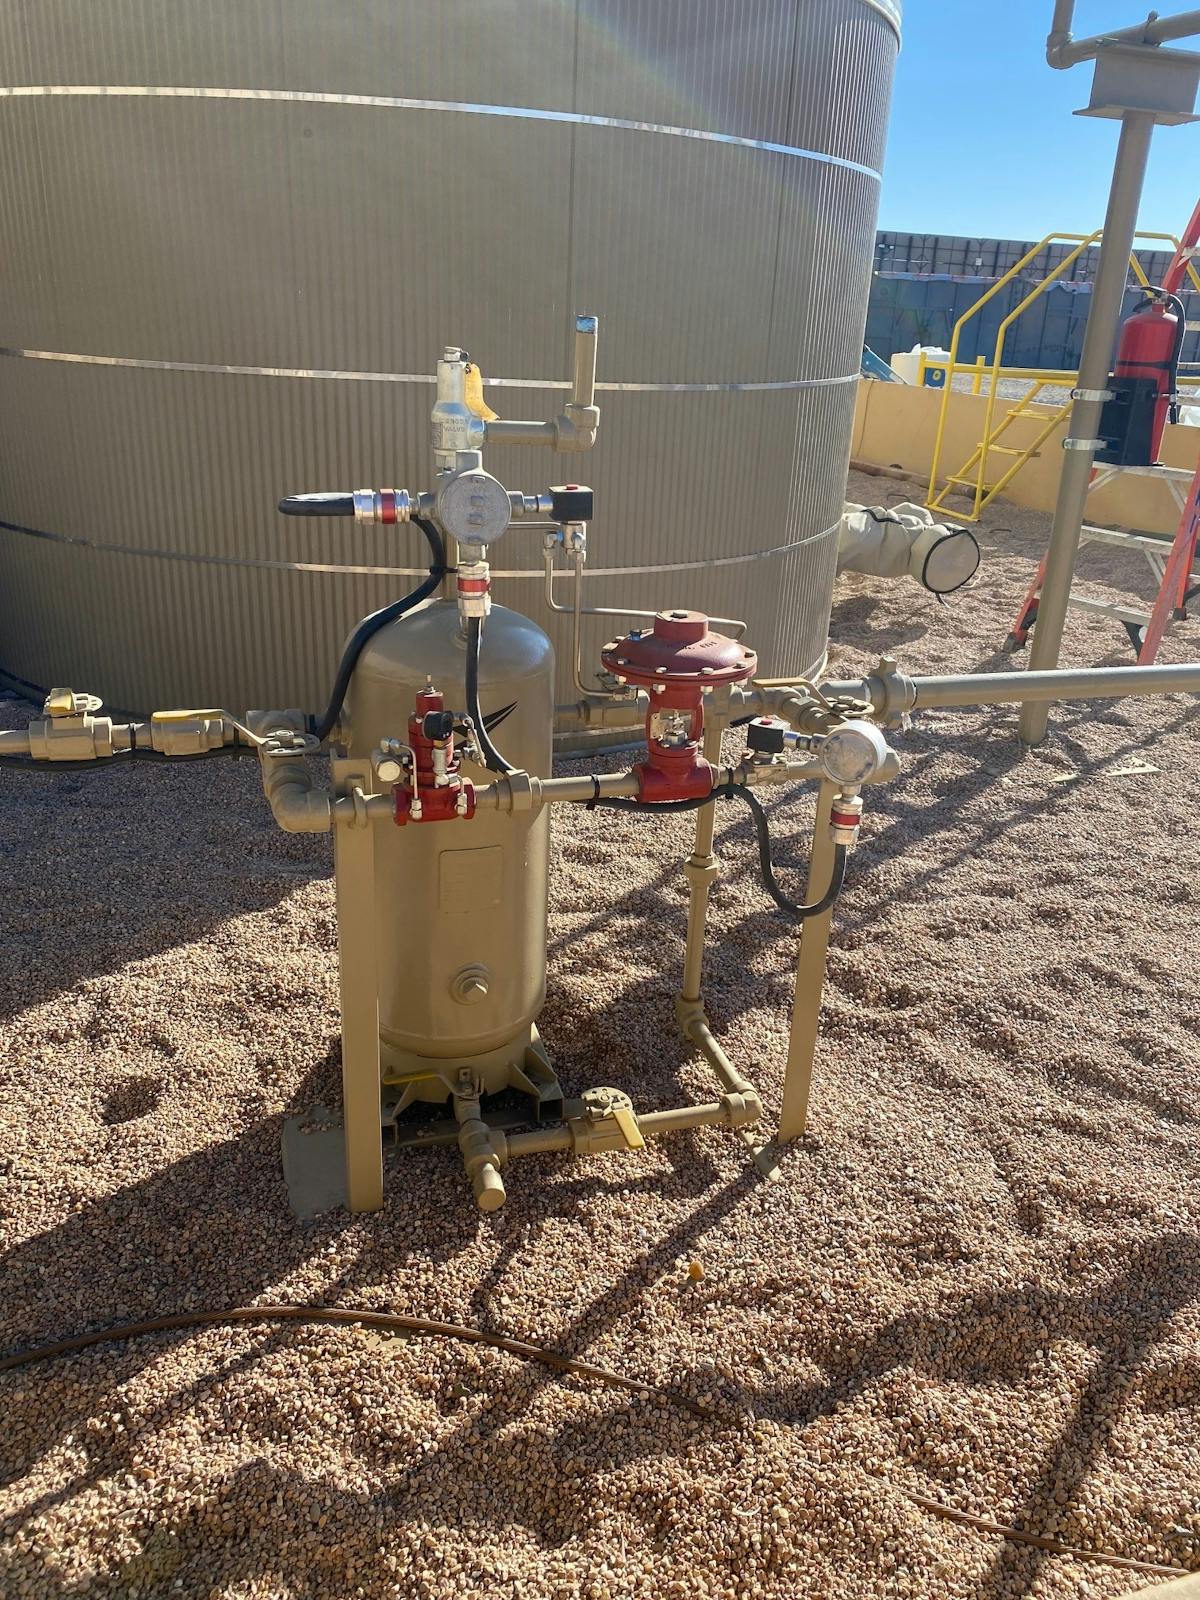 Leveraging Phoenix Contact&rsquo;s industrial hardware and ClearBlade&rsquo;s edge platform, Lansera created the SmartPurge and Tank Eye products to help oil and gas companies stay in emissions compliance. Image Courtesy of Lansera.